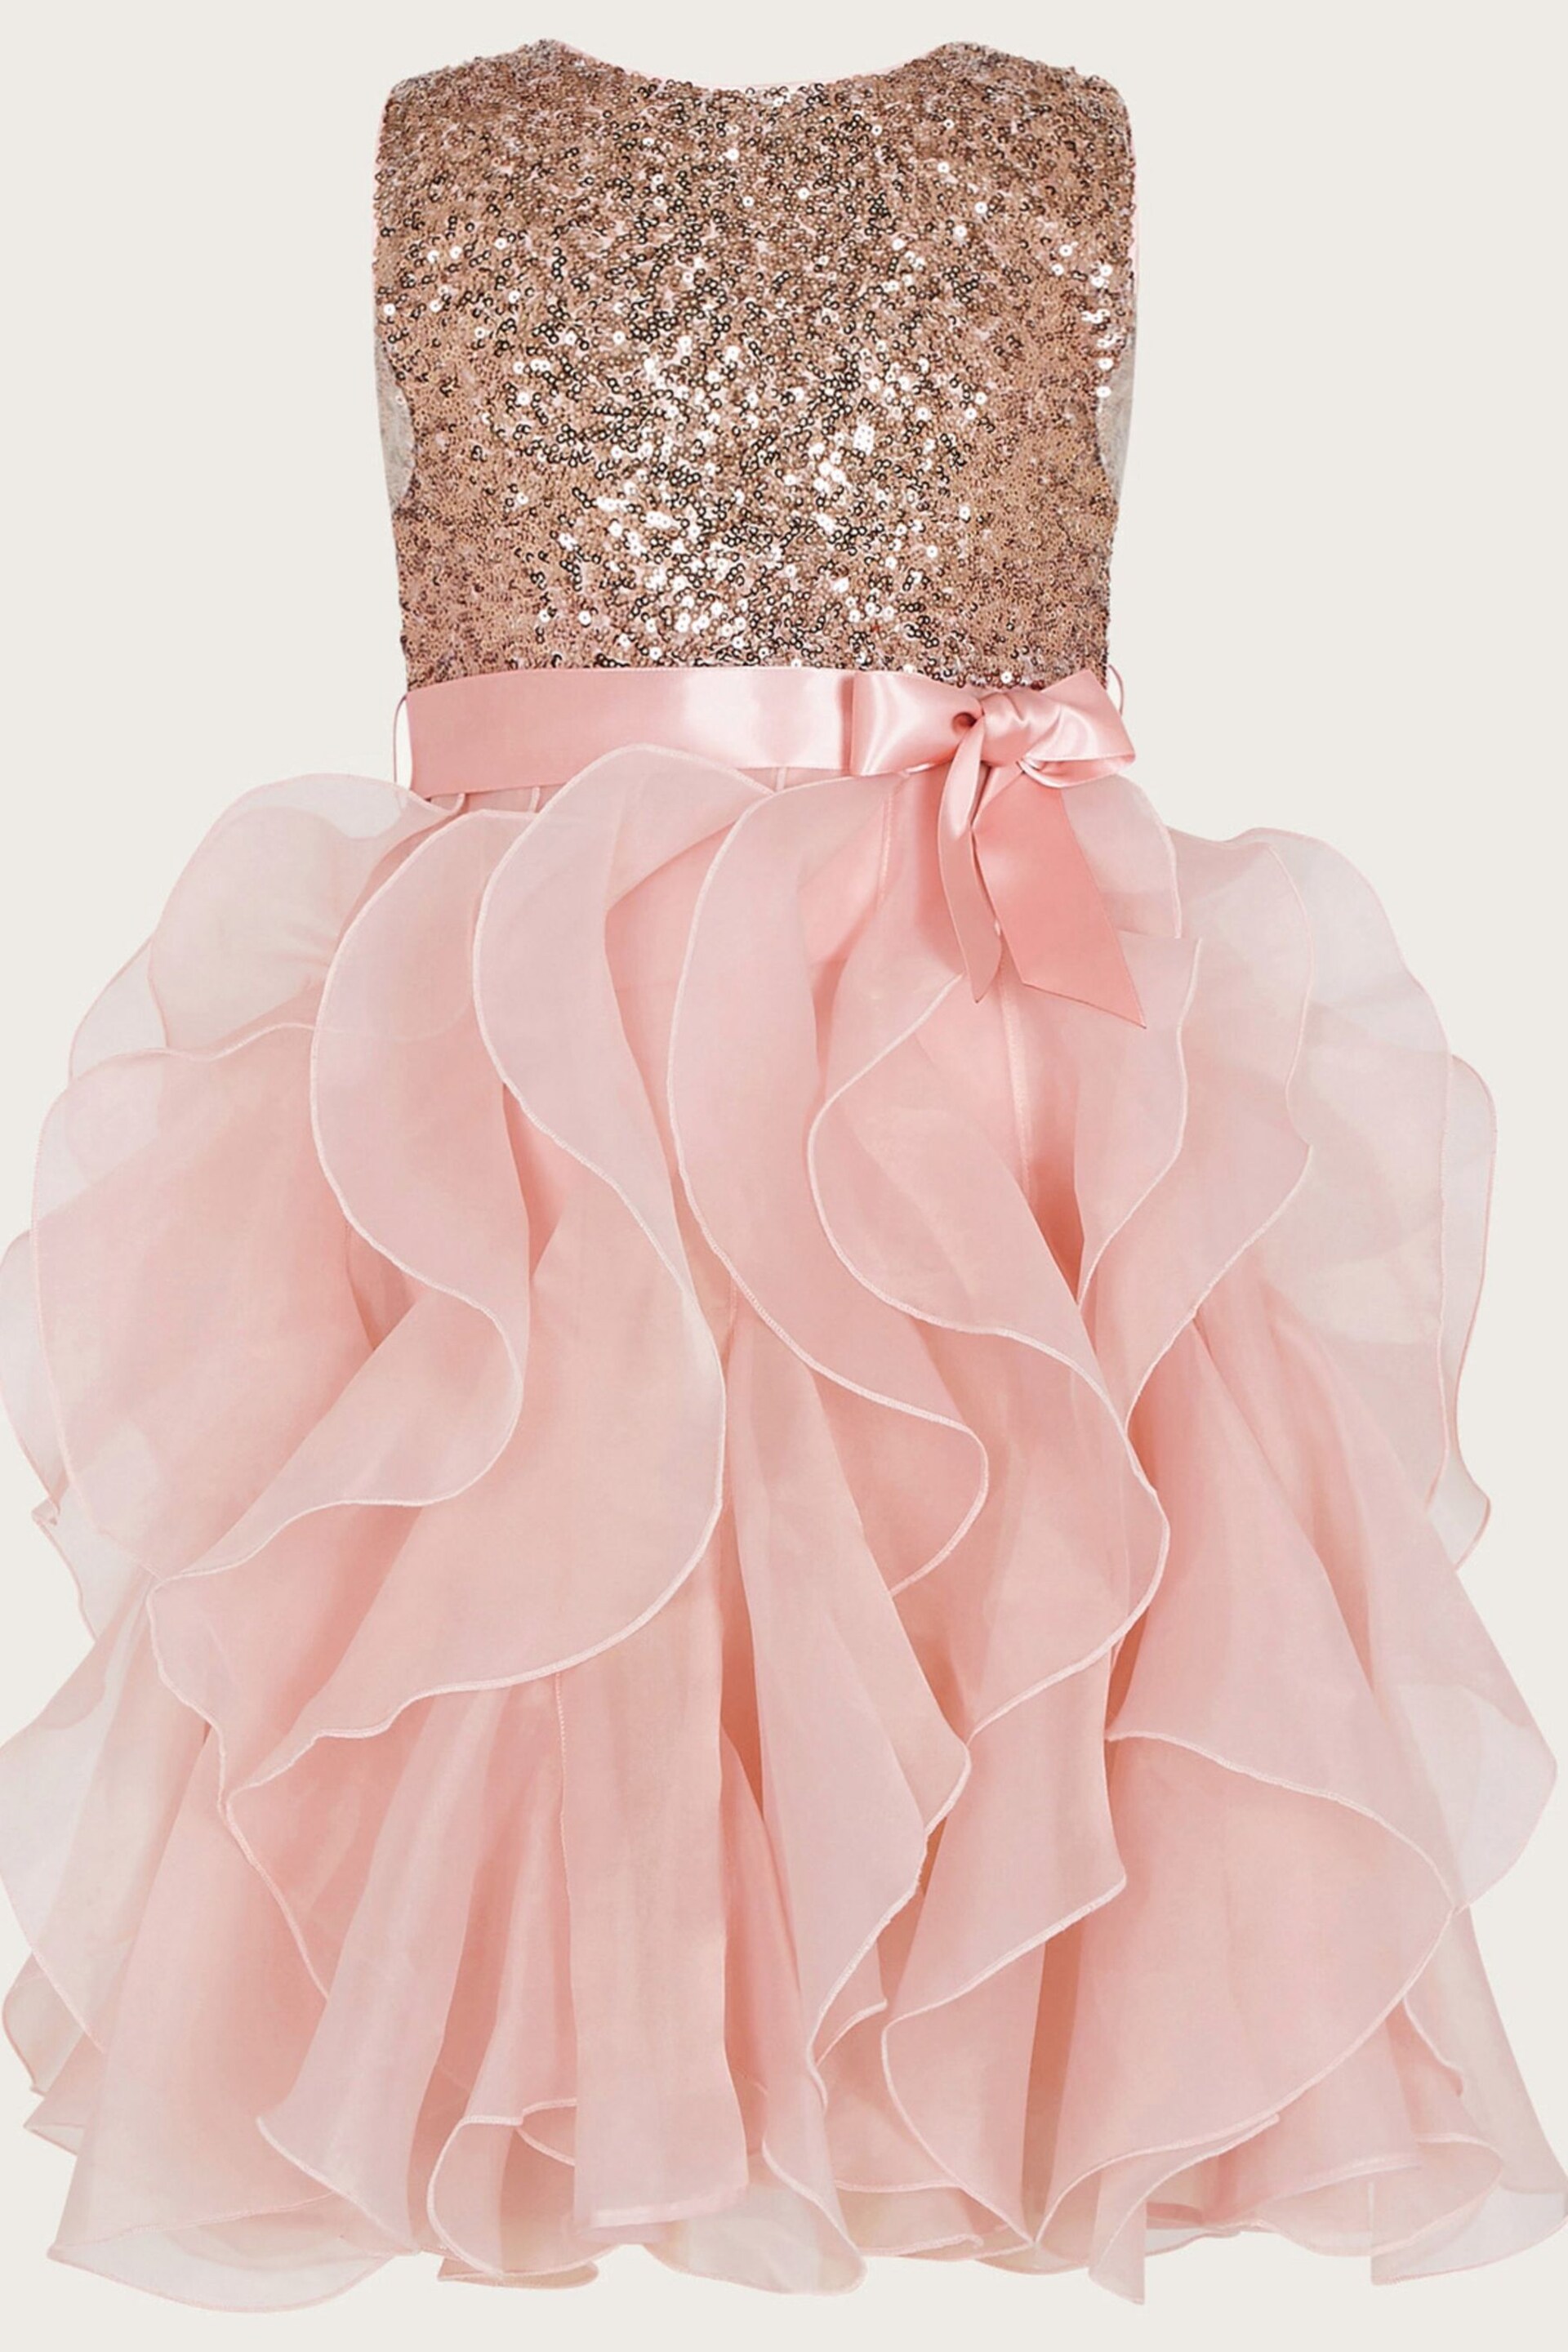 Monsoon Pink Sequin Ruffle Cancan Dress - Image 3 of 5